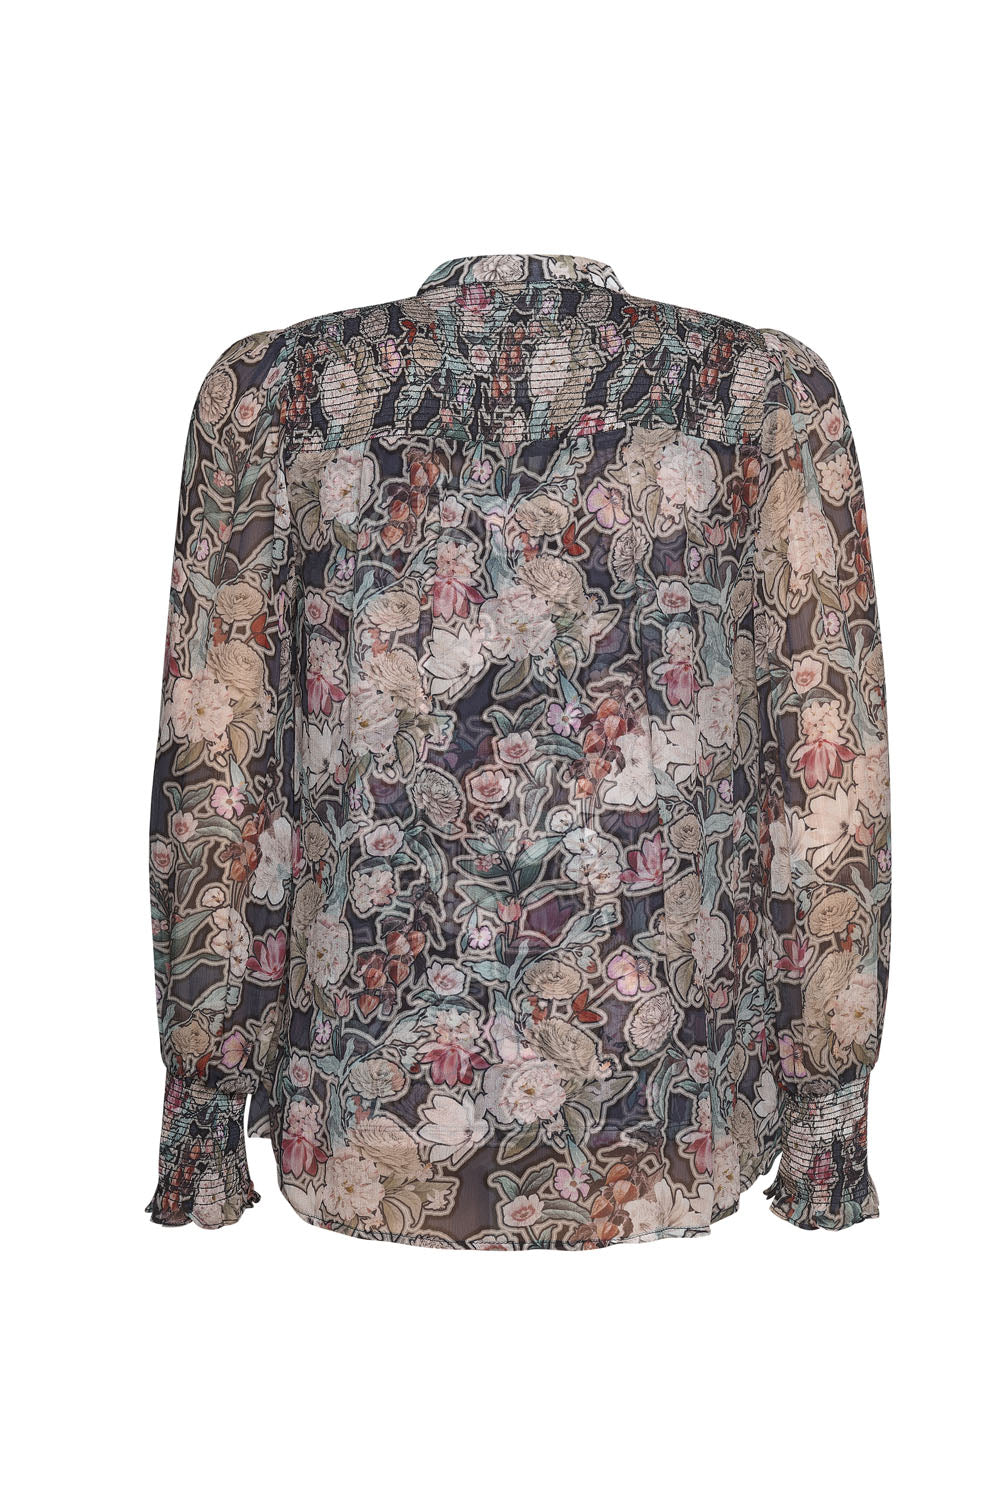 LOOBIE'S STORY LEGACY BLOUSE - THE VOGUE STORE